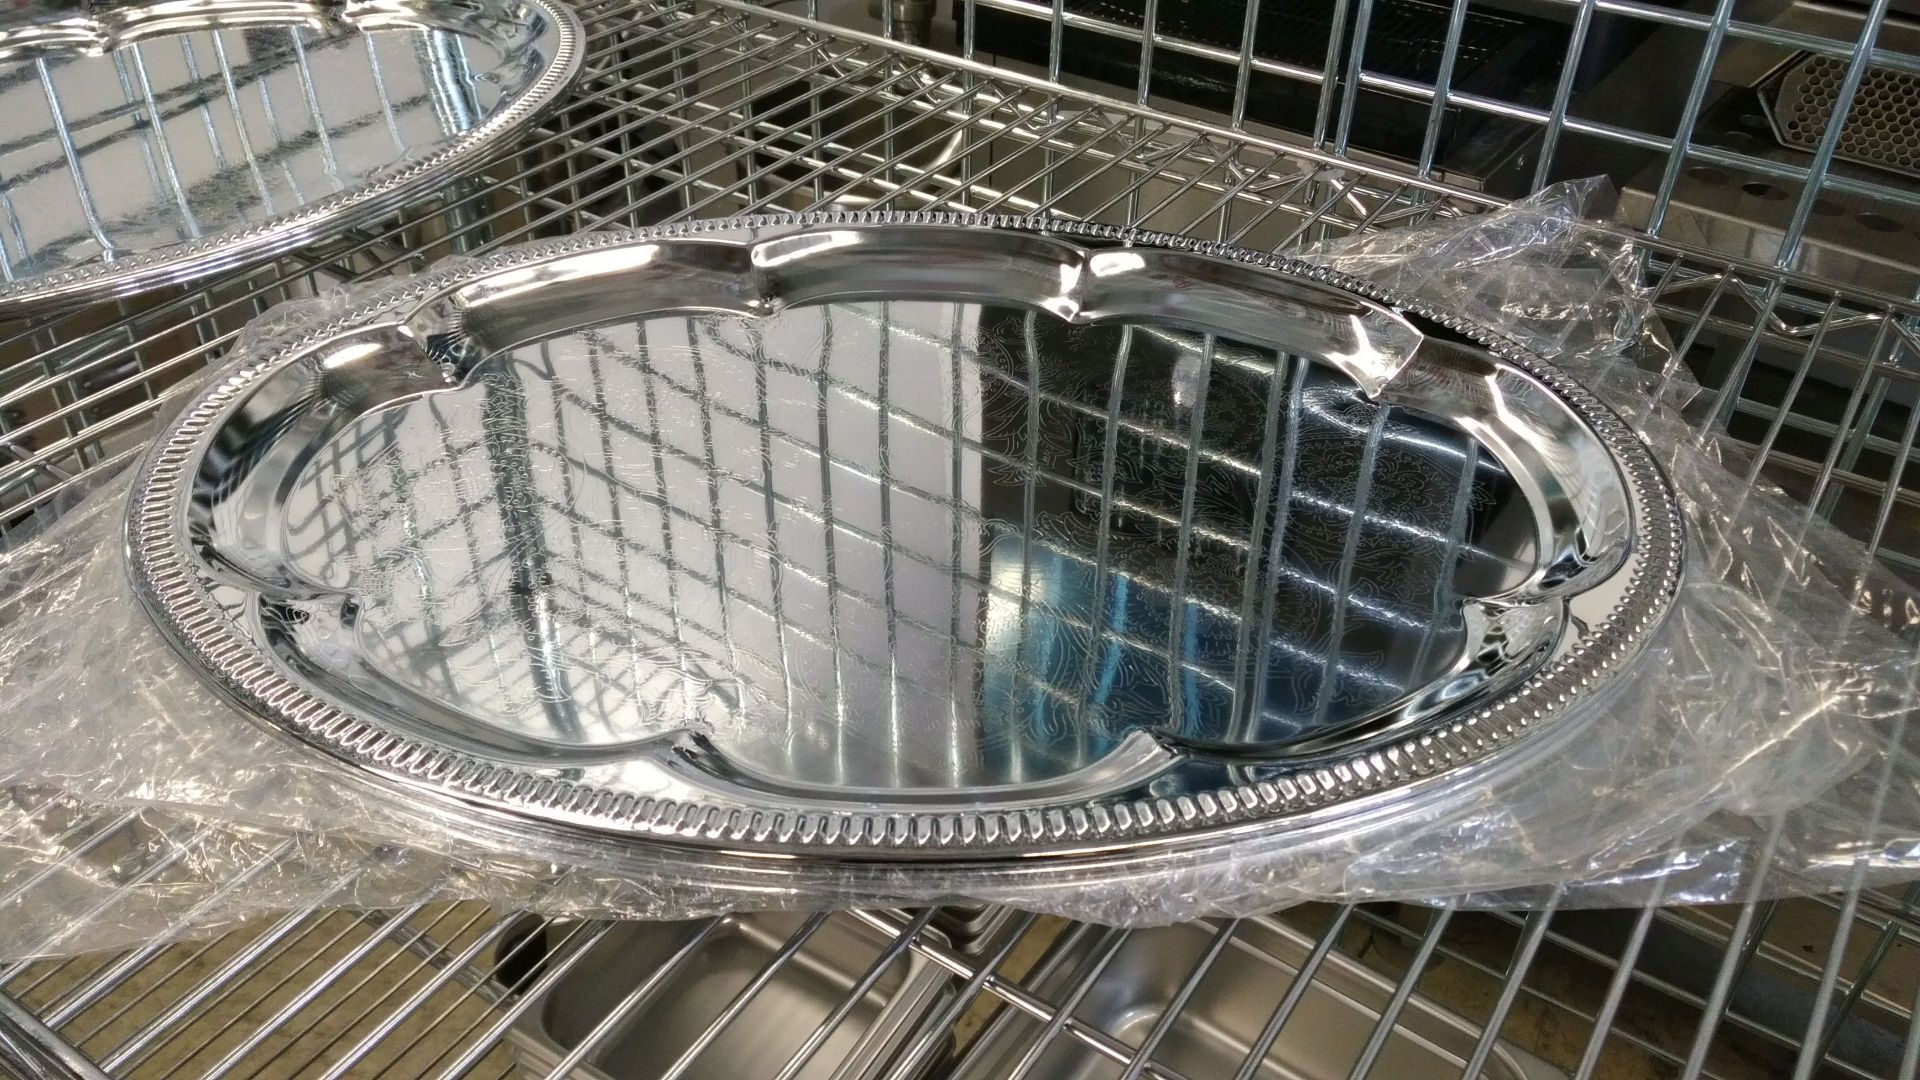 18" Oval Chrome Plated Steel Platters - Lot of 3